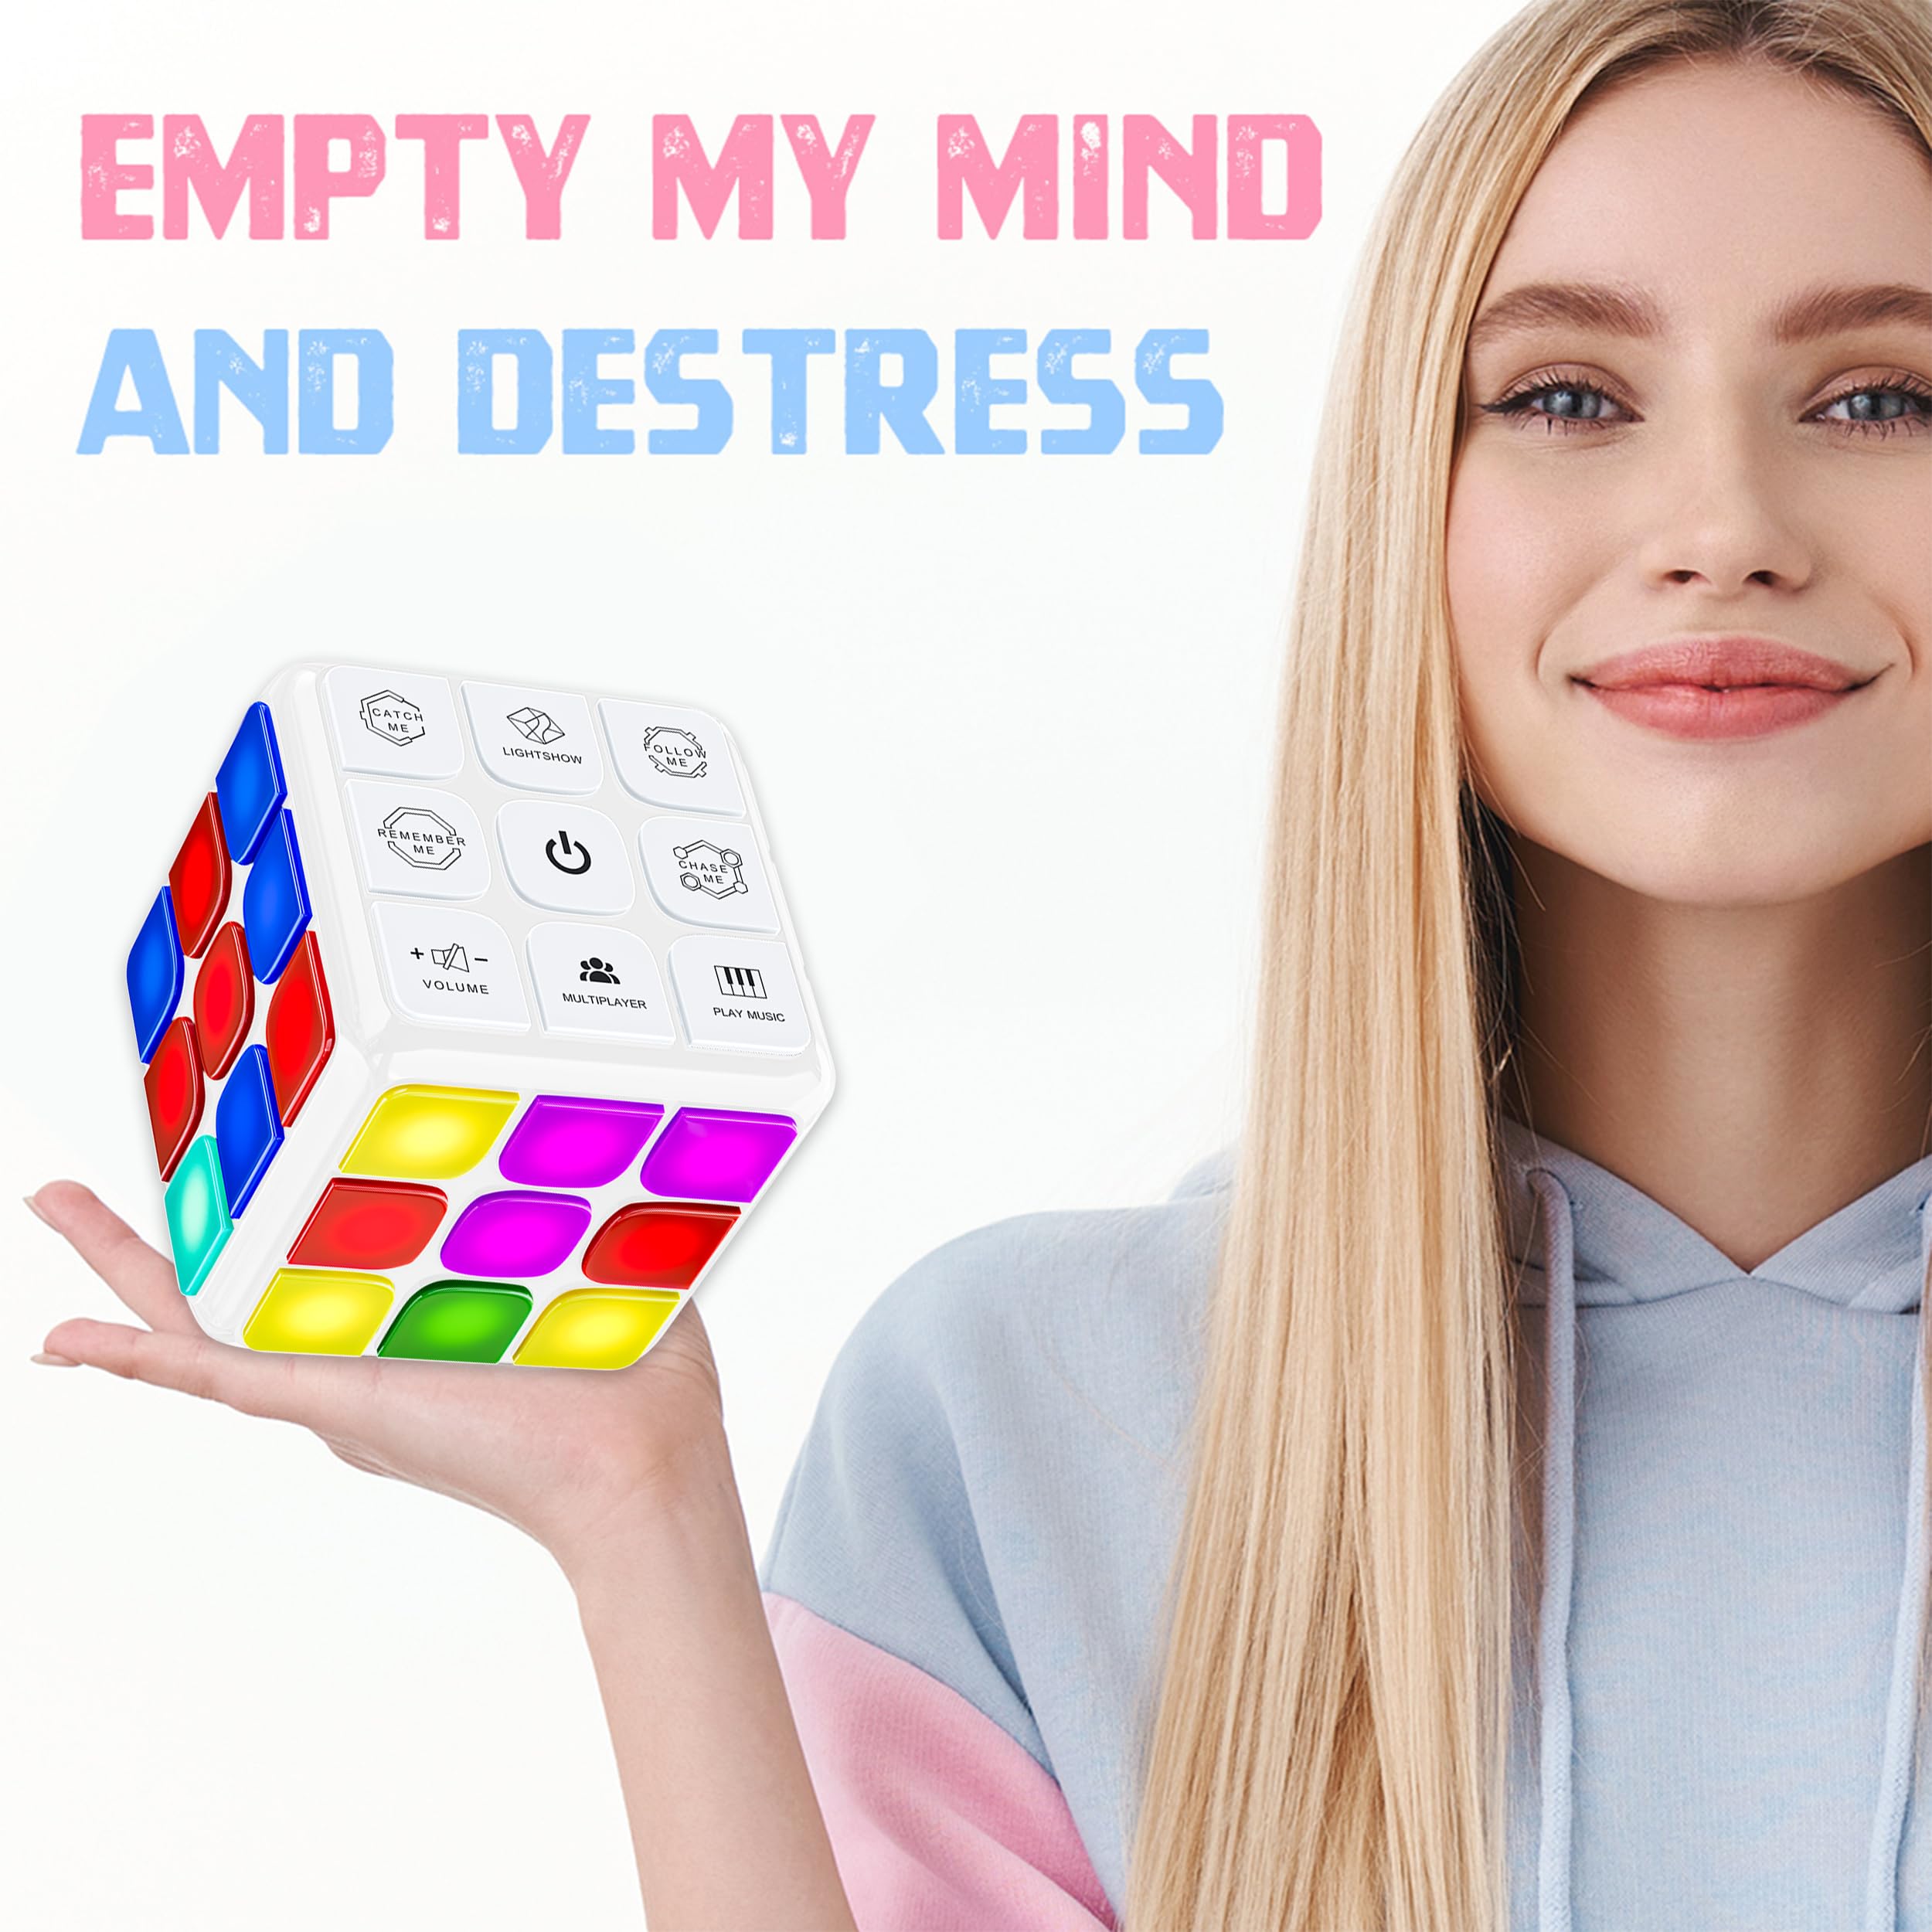 Skywin Puzzle Cube Game - Flashing Cube Handheld Electronic Games Stem Toy - Fun Memory Games & Brain Games for Adults and Kids